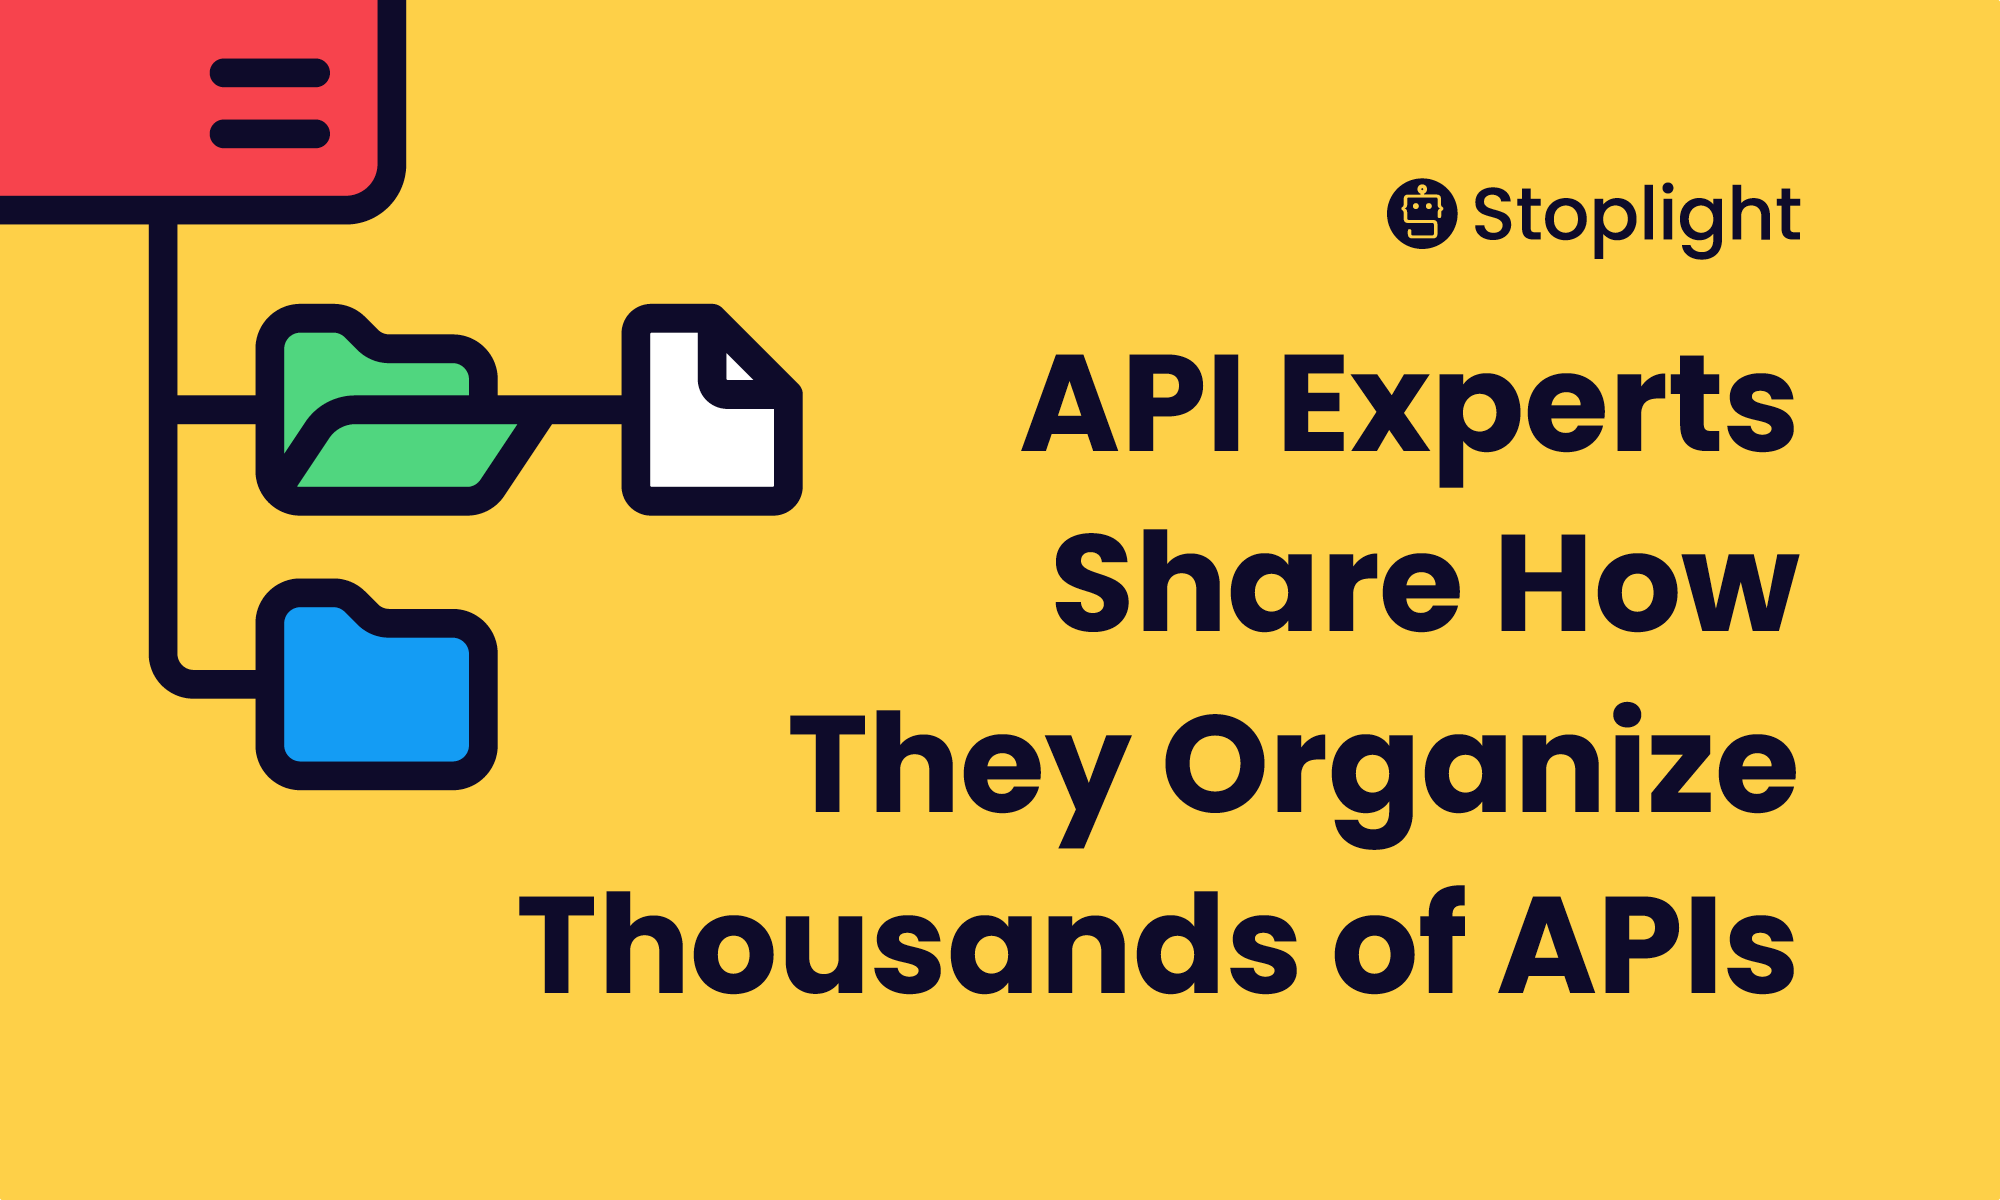 API Experts Share How They Organize Thousands of APIs